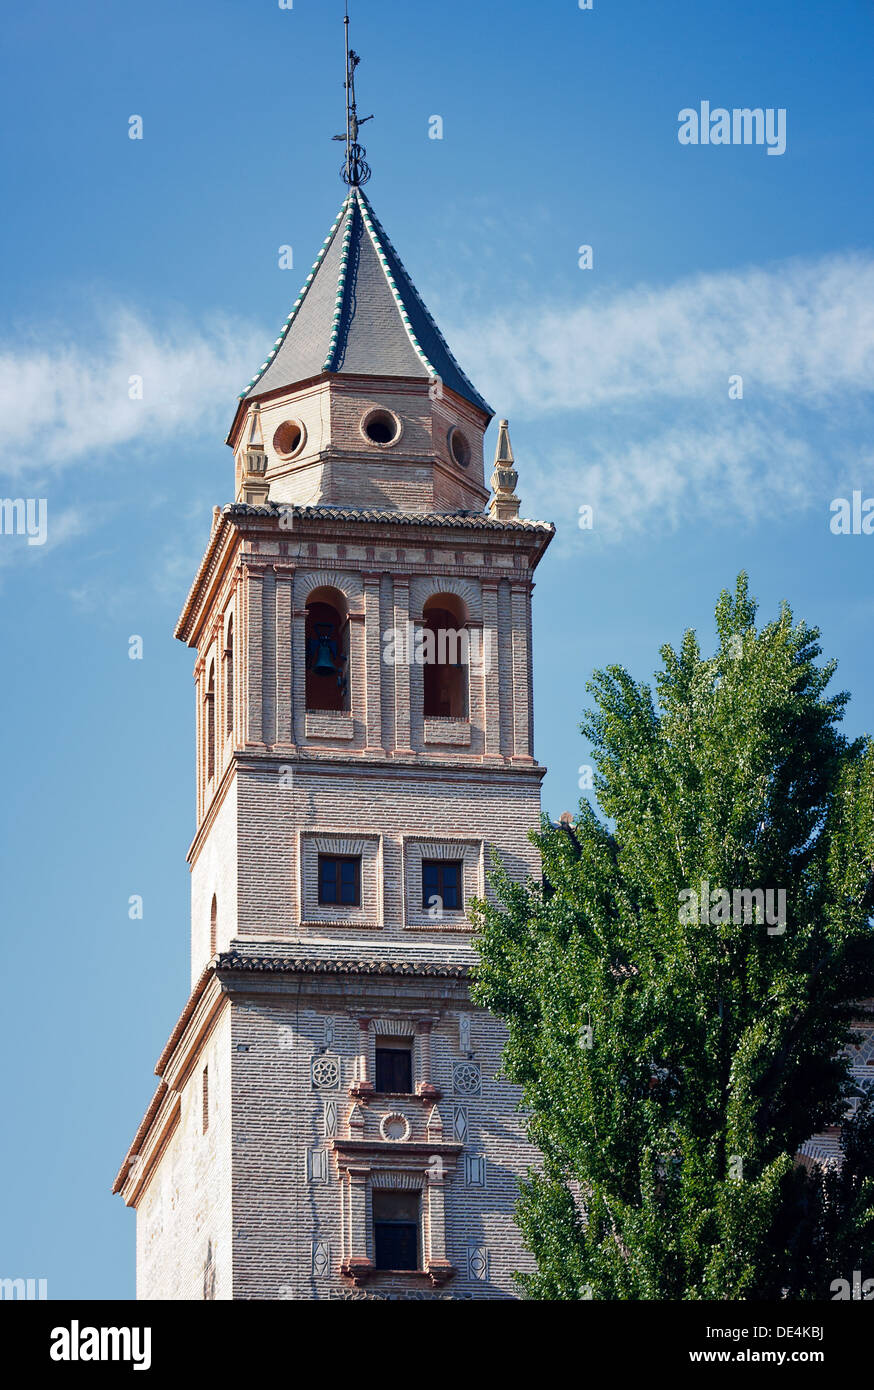 Church tower in Alhambra Stock Photo